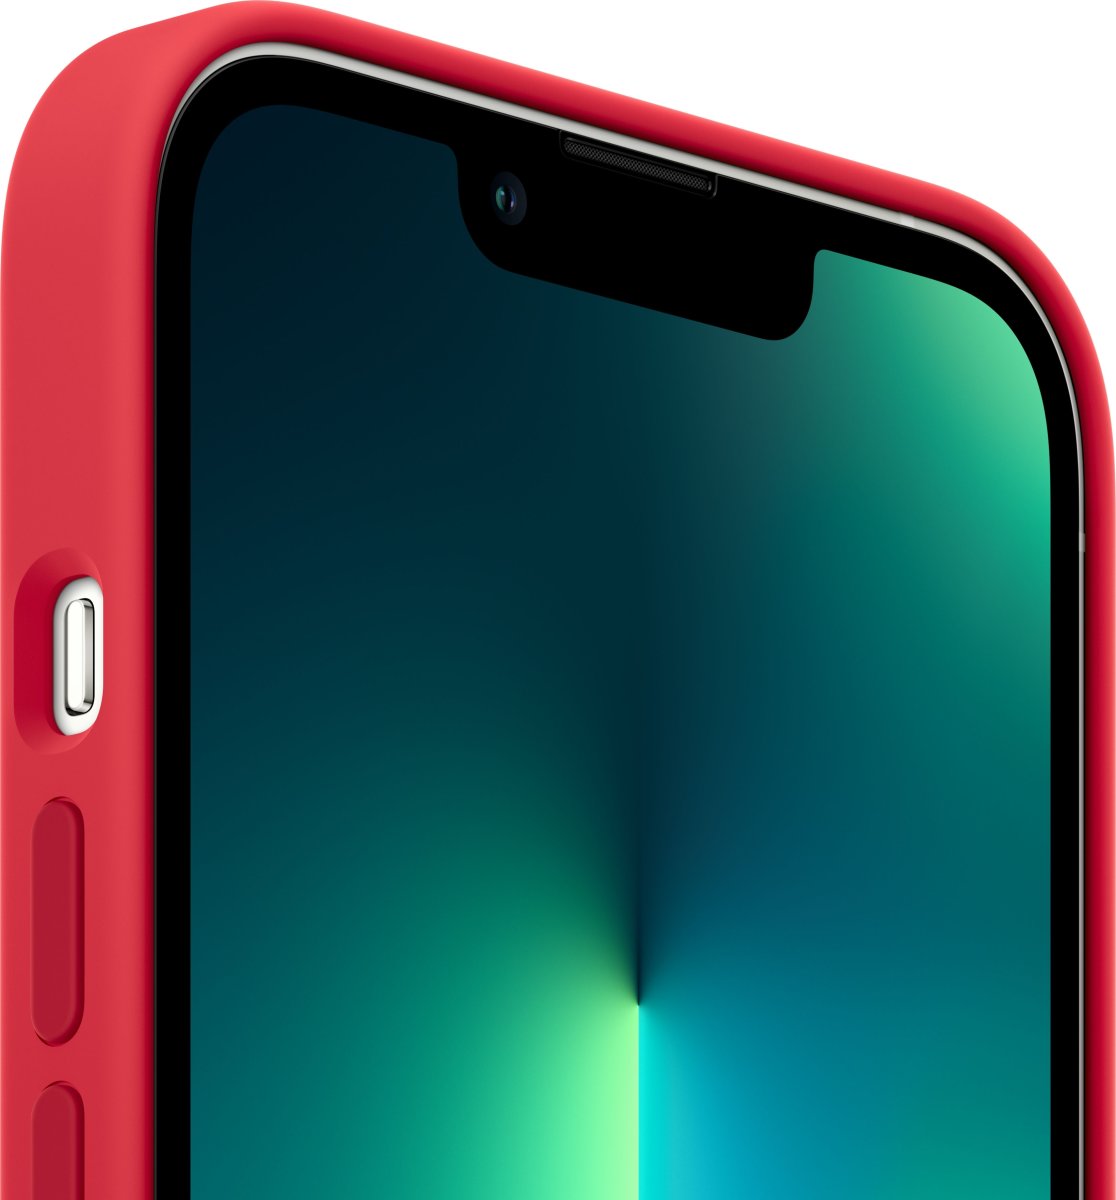 Apple iPhone 13 Pro Max silikone cover, (PROD)RED